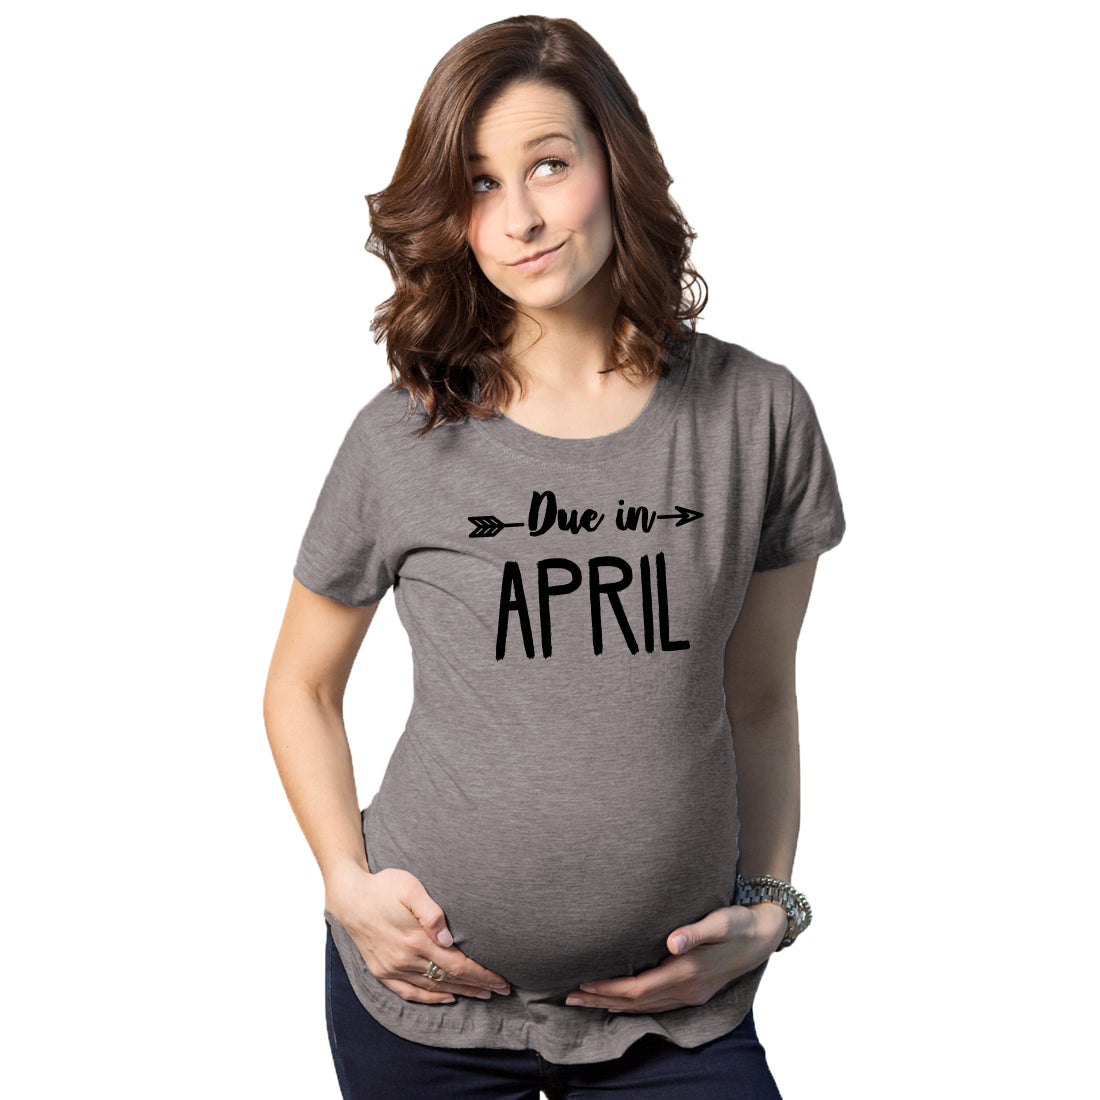 Funny Dark Heather Grey - April Due In Announcement Maternity T Shirt Nerdy Tee